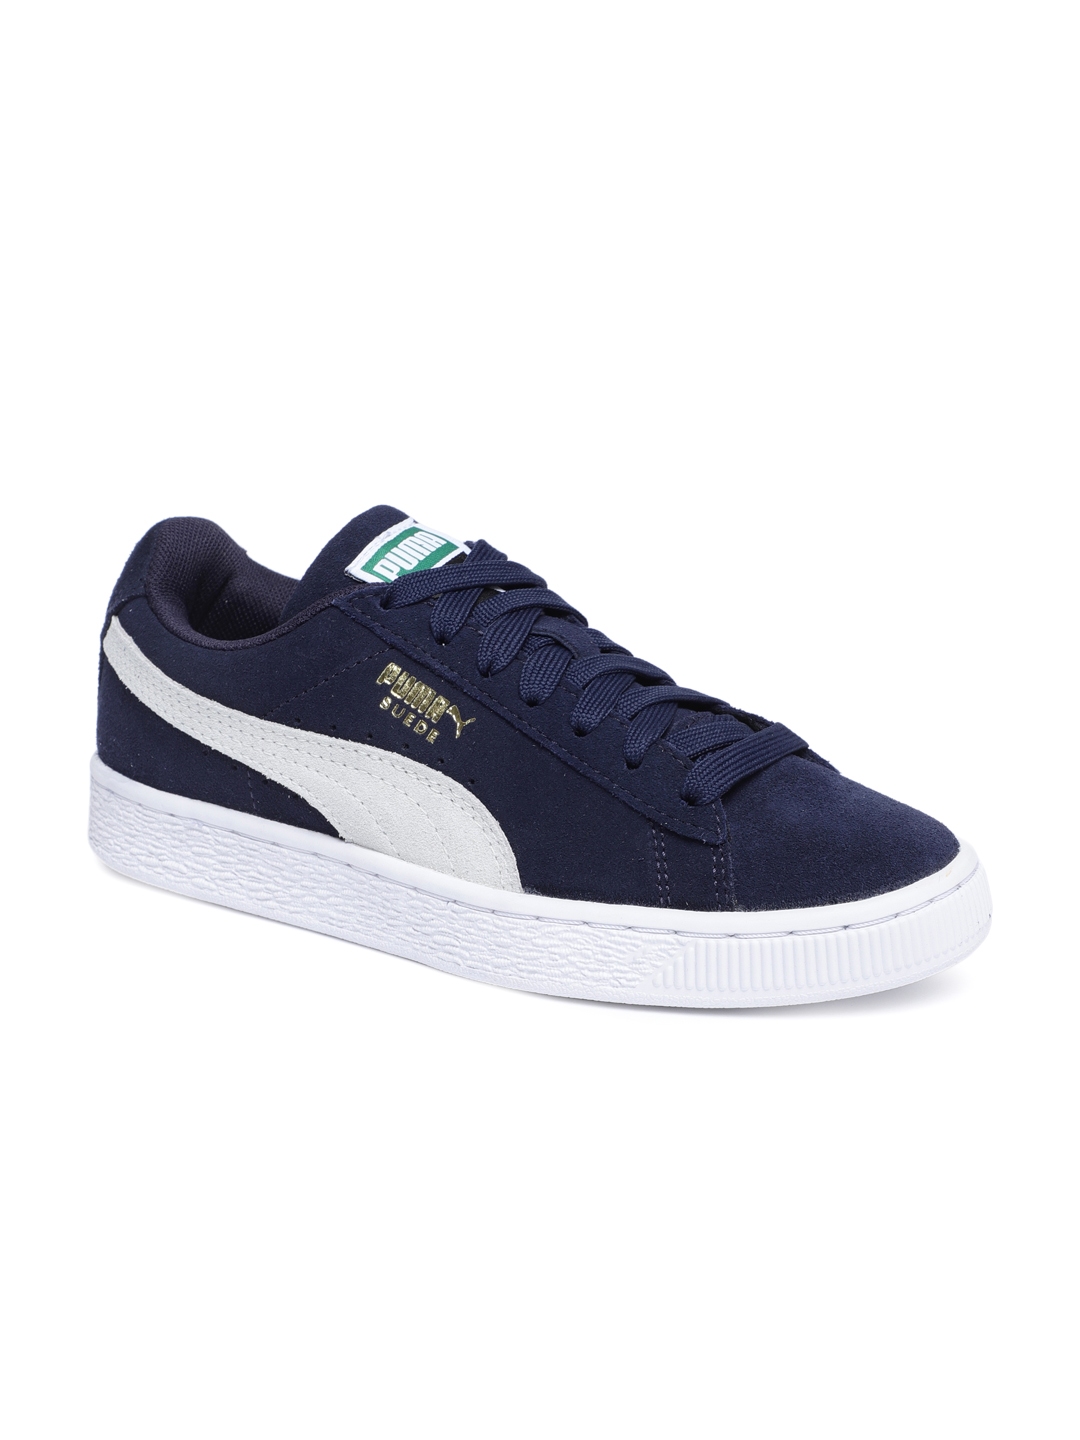 Buy Puma Men Navy Blue Suede Classic Sneakers - Casual Shoes for Men ...